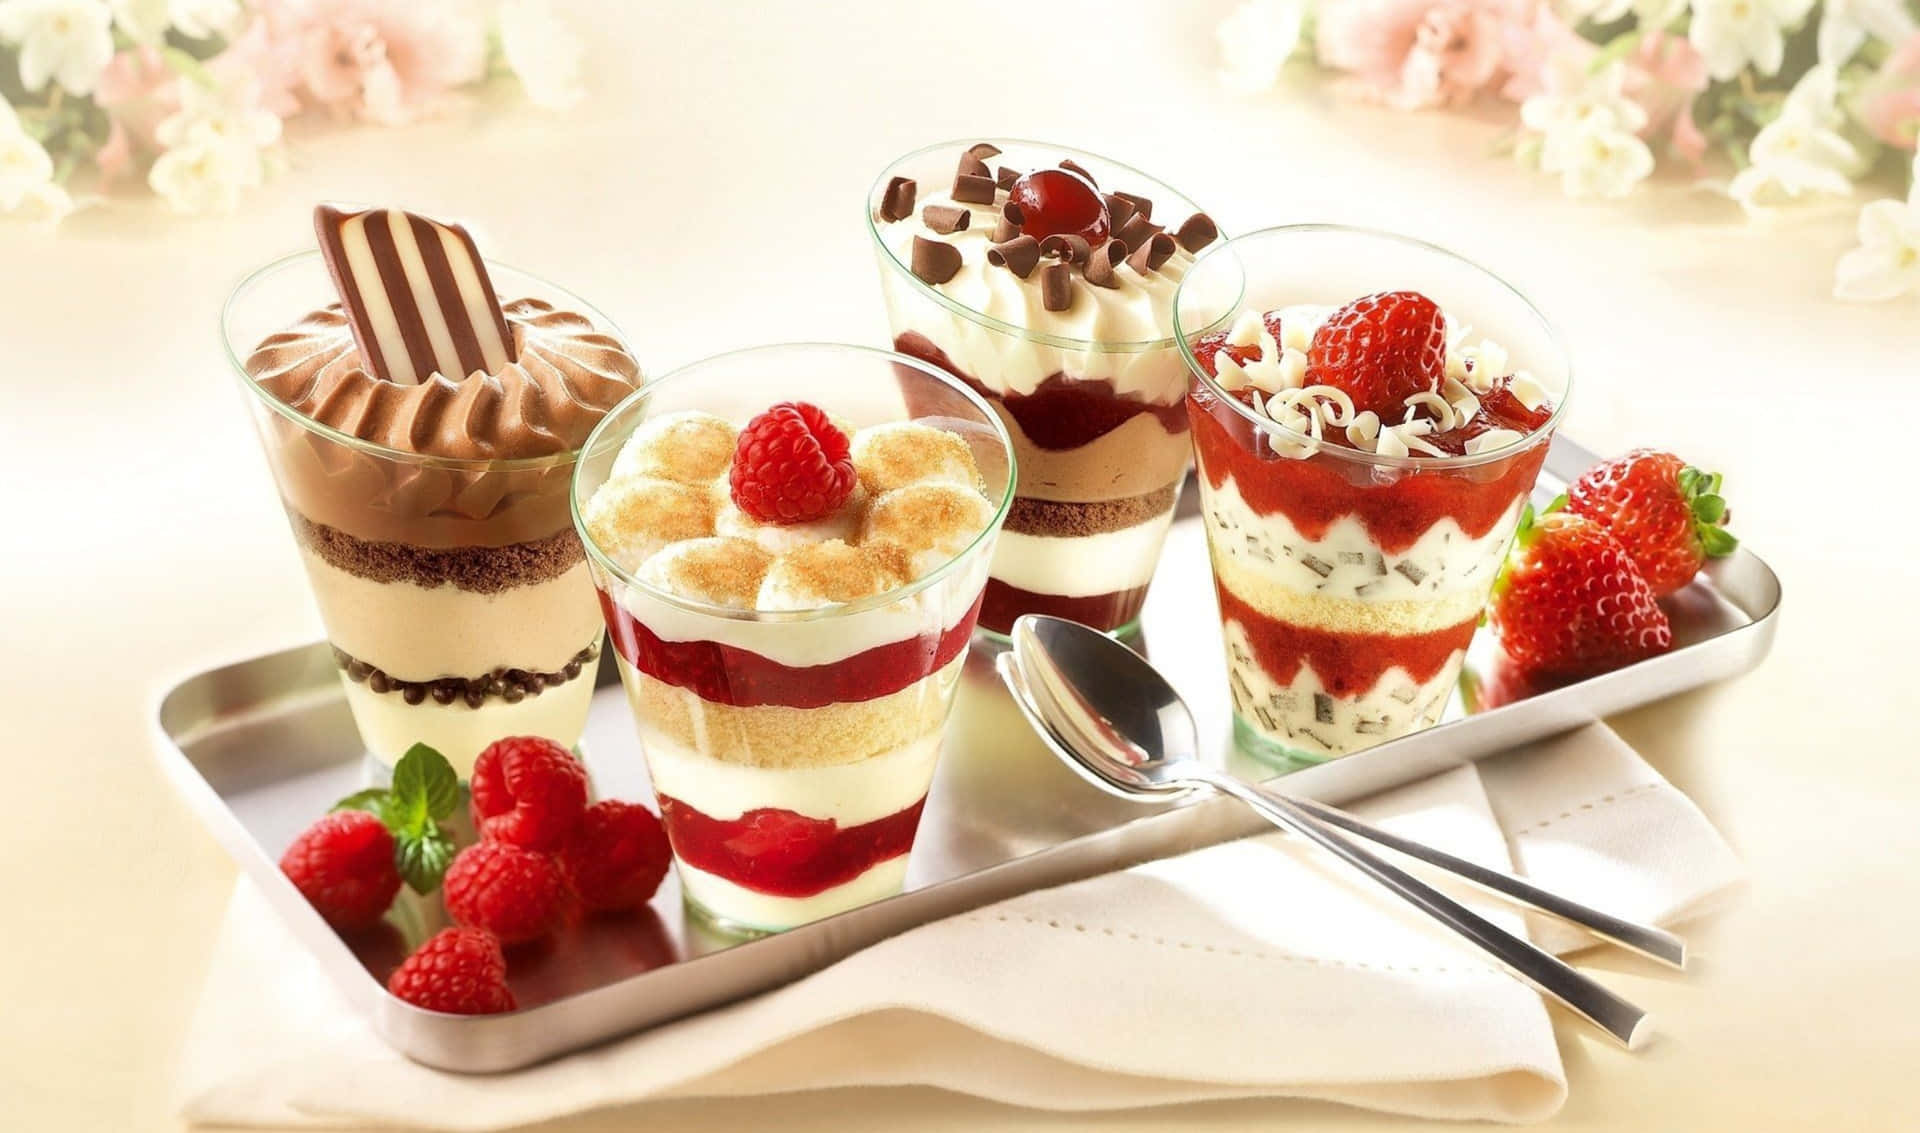 An array of delicious desserts ready to be enjoyed